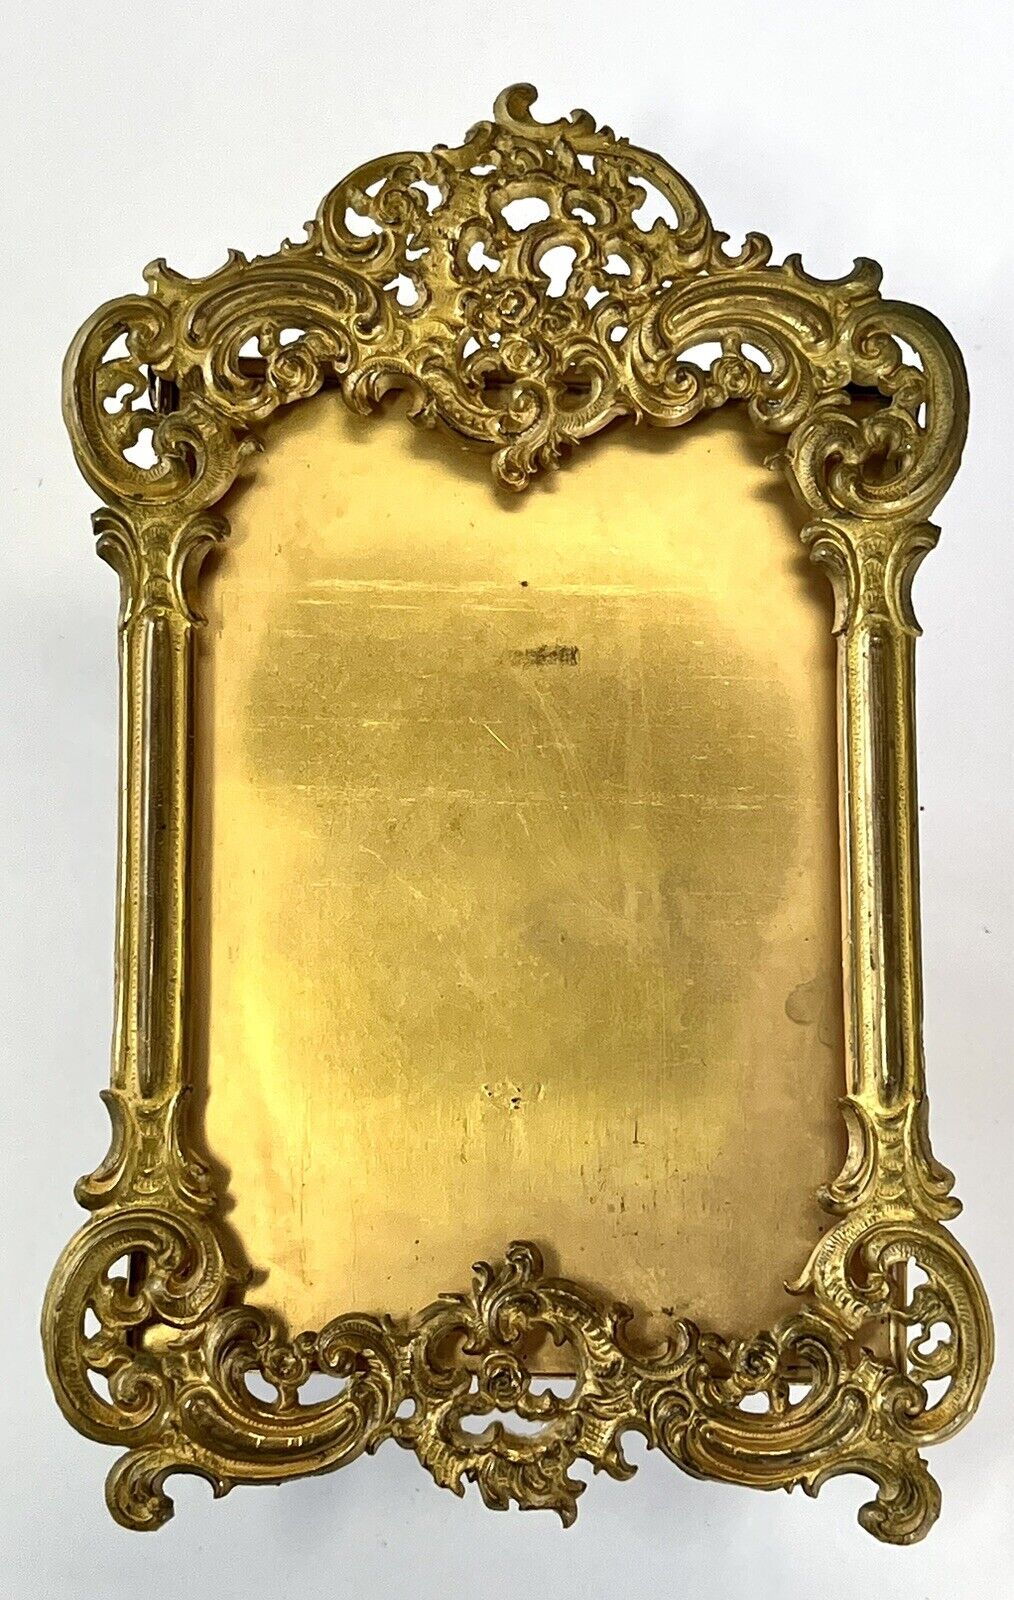 Antique Brass Gilt Photo Frame Royal Manufacturing Co. Ornate Victorian 19th C